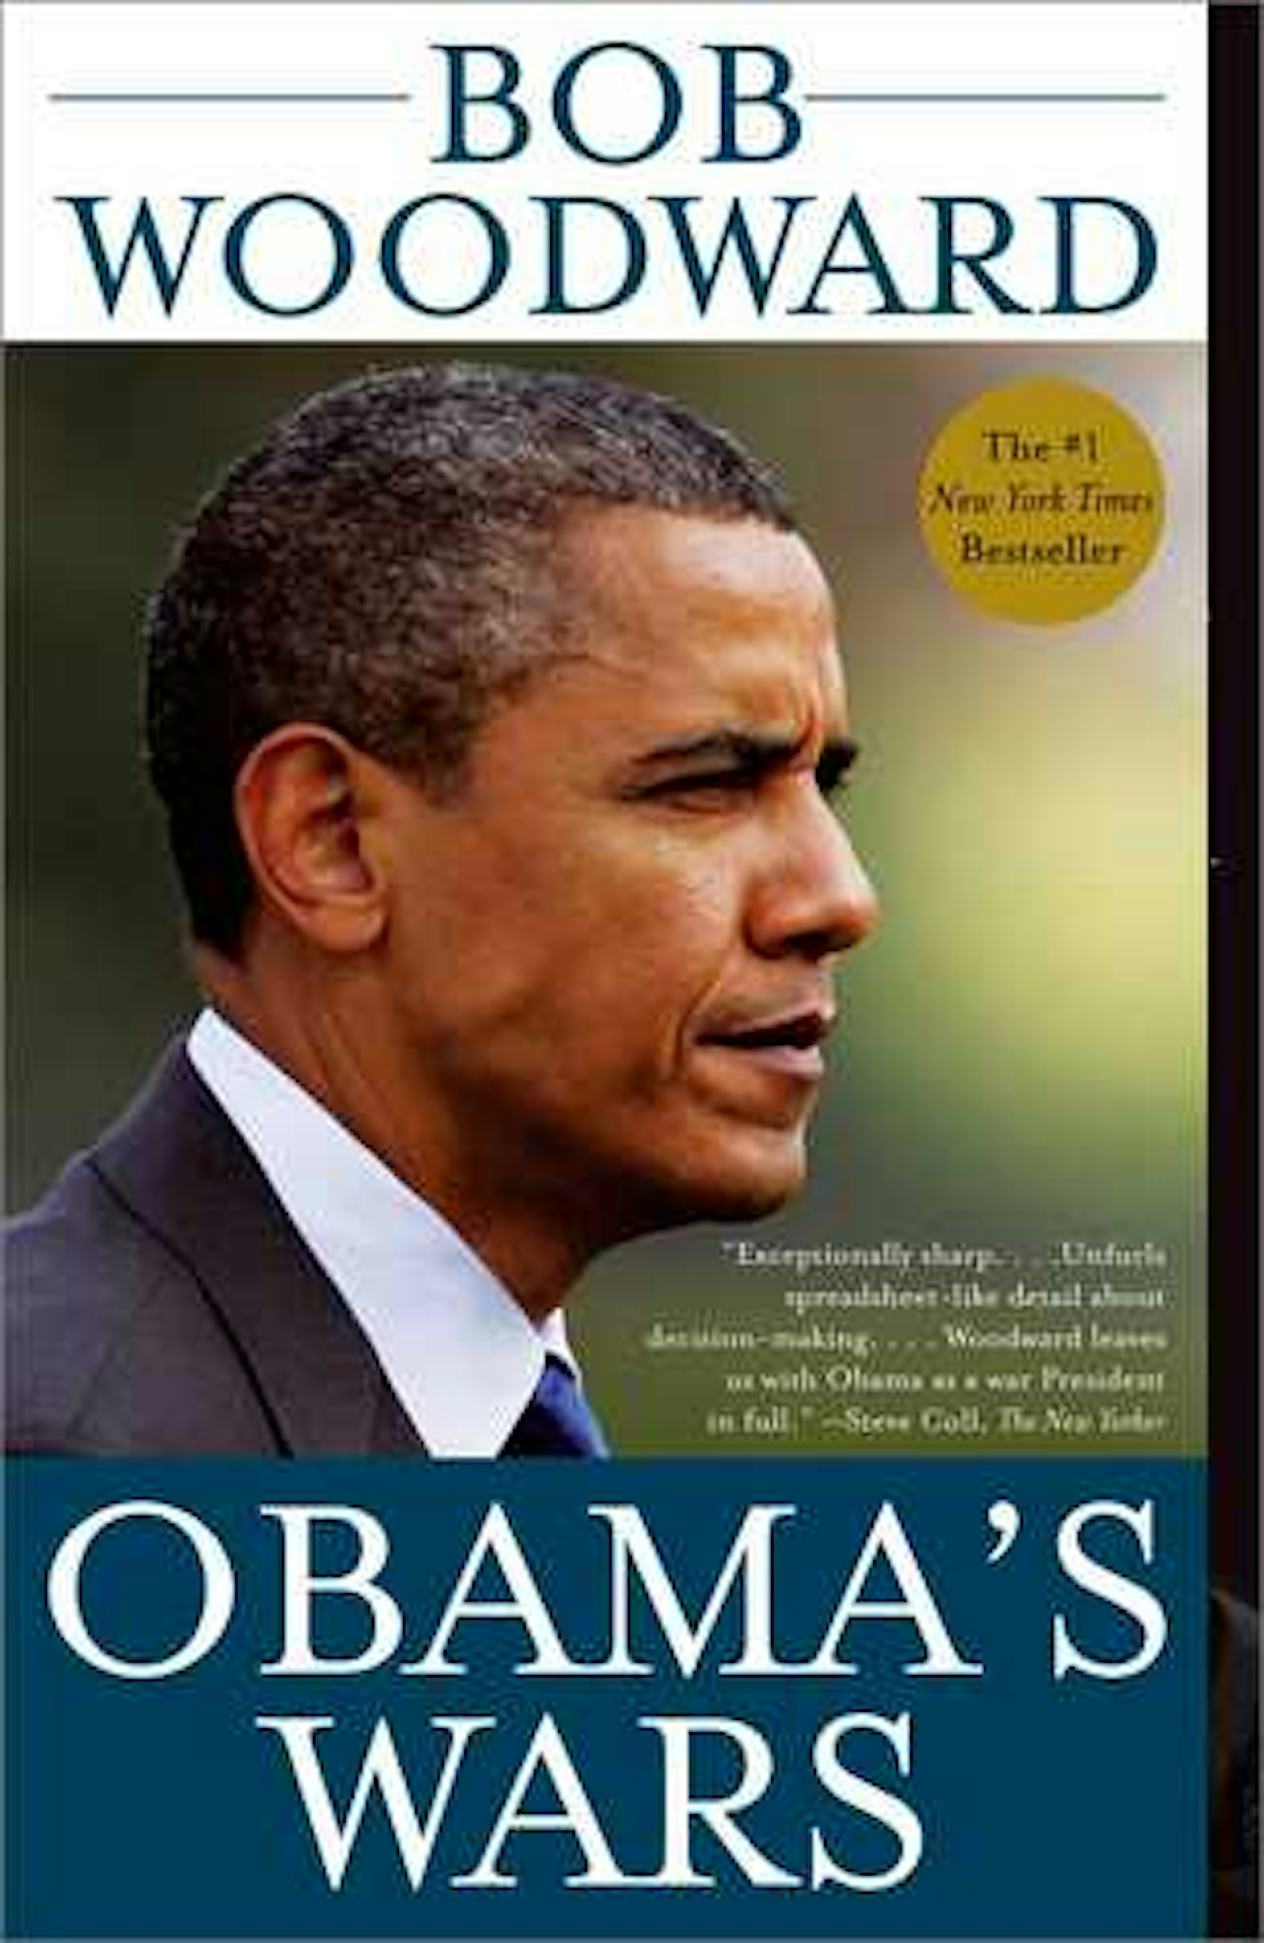 11 Books About Barack Obama's Legacy To Read This Presidents Day Weekend